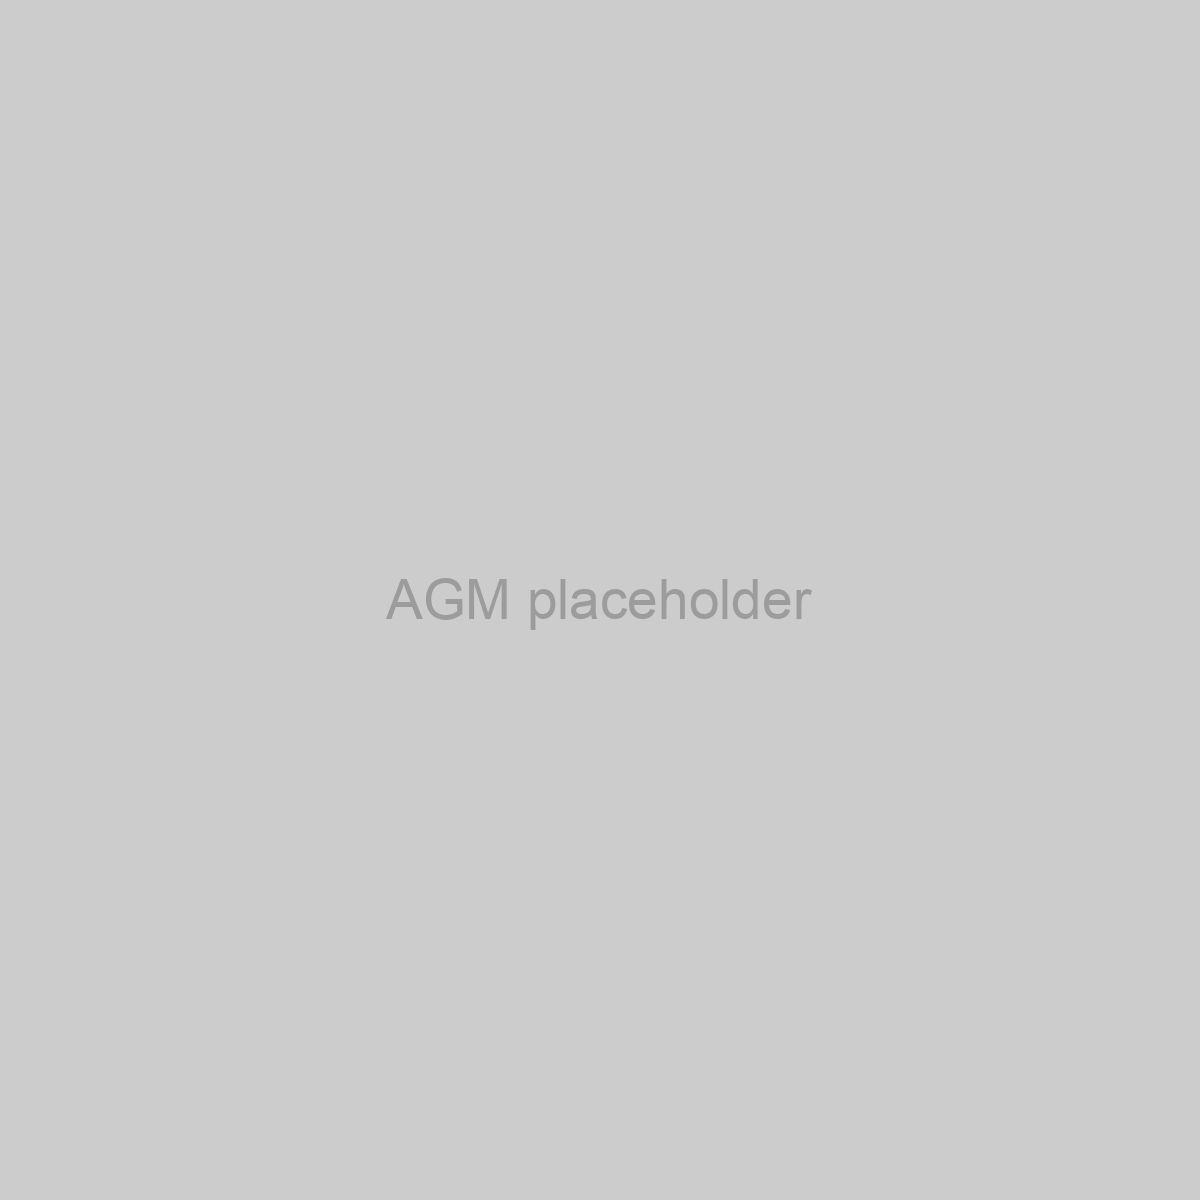 AGM Placeholder Image